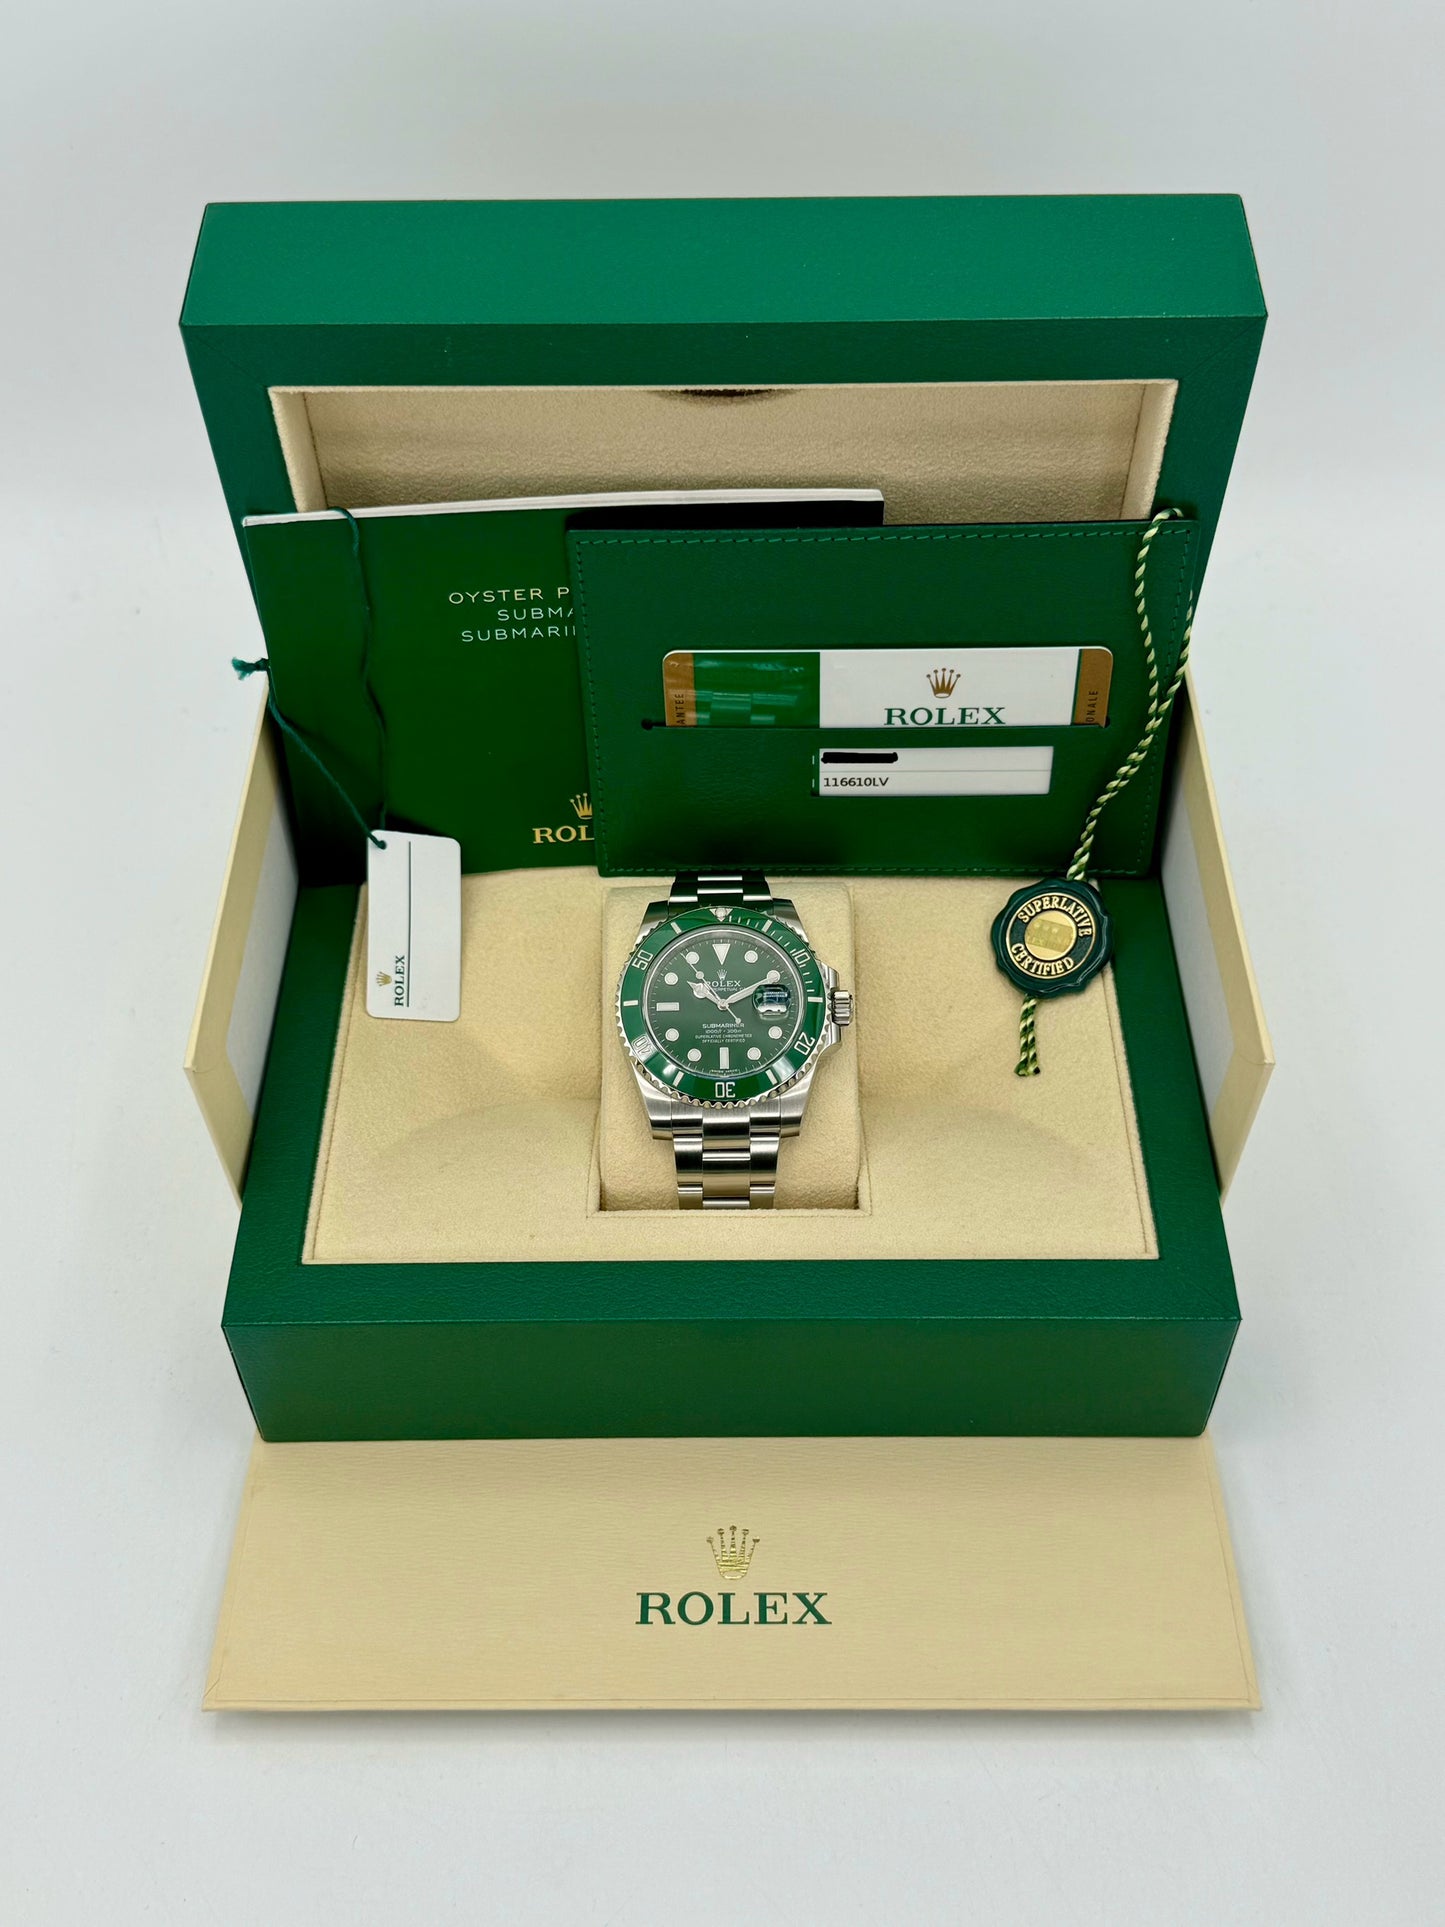 2018 Submariner “Hulk” 40mm 116610LV Stainless Steel Green Dial - MyWatchLLC